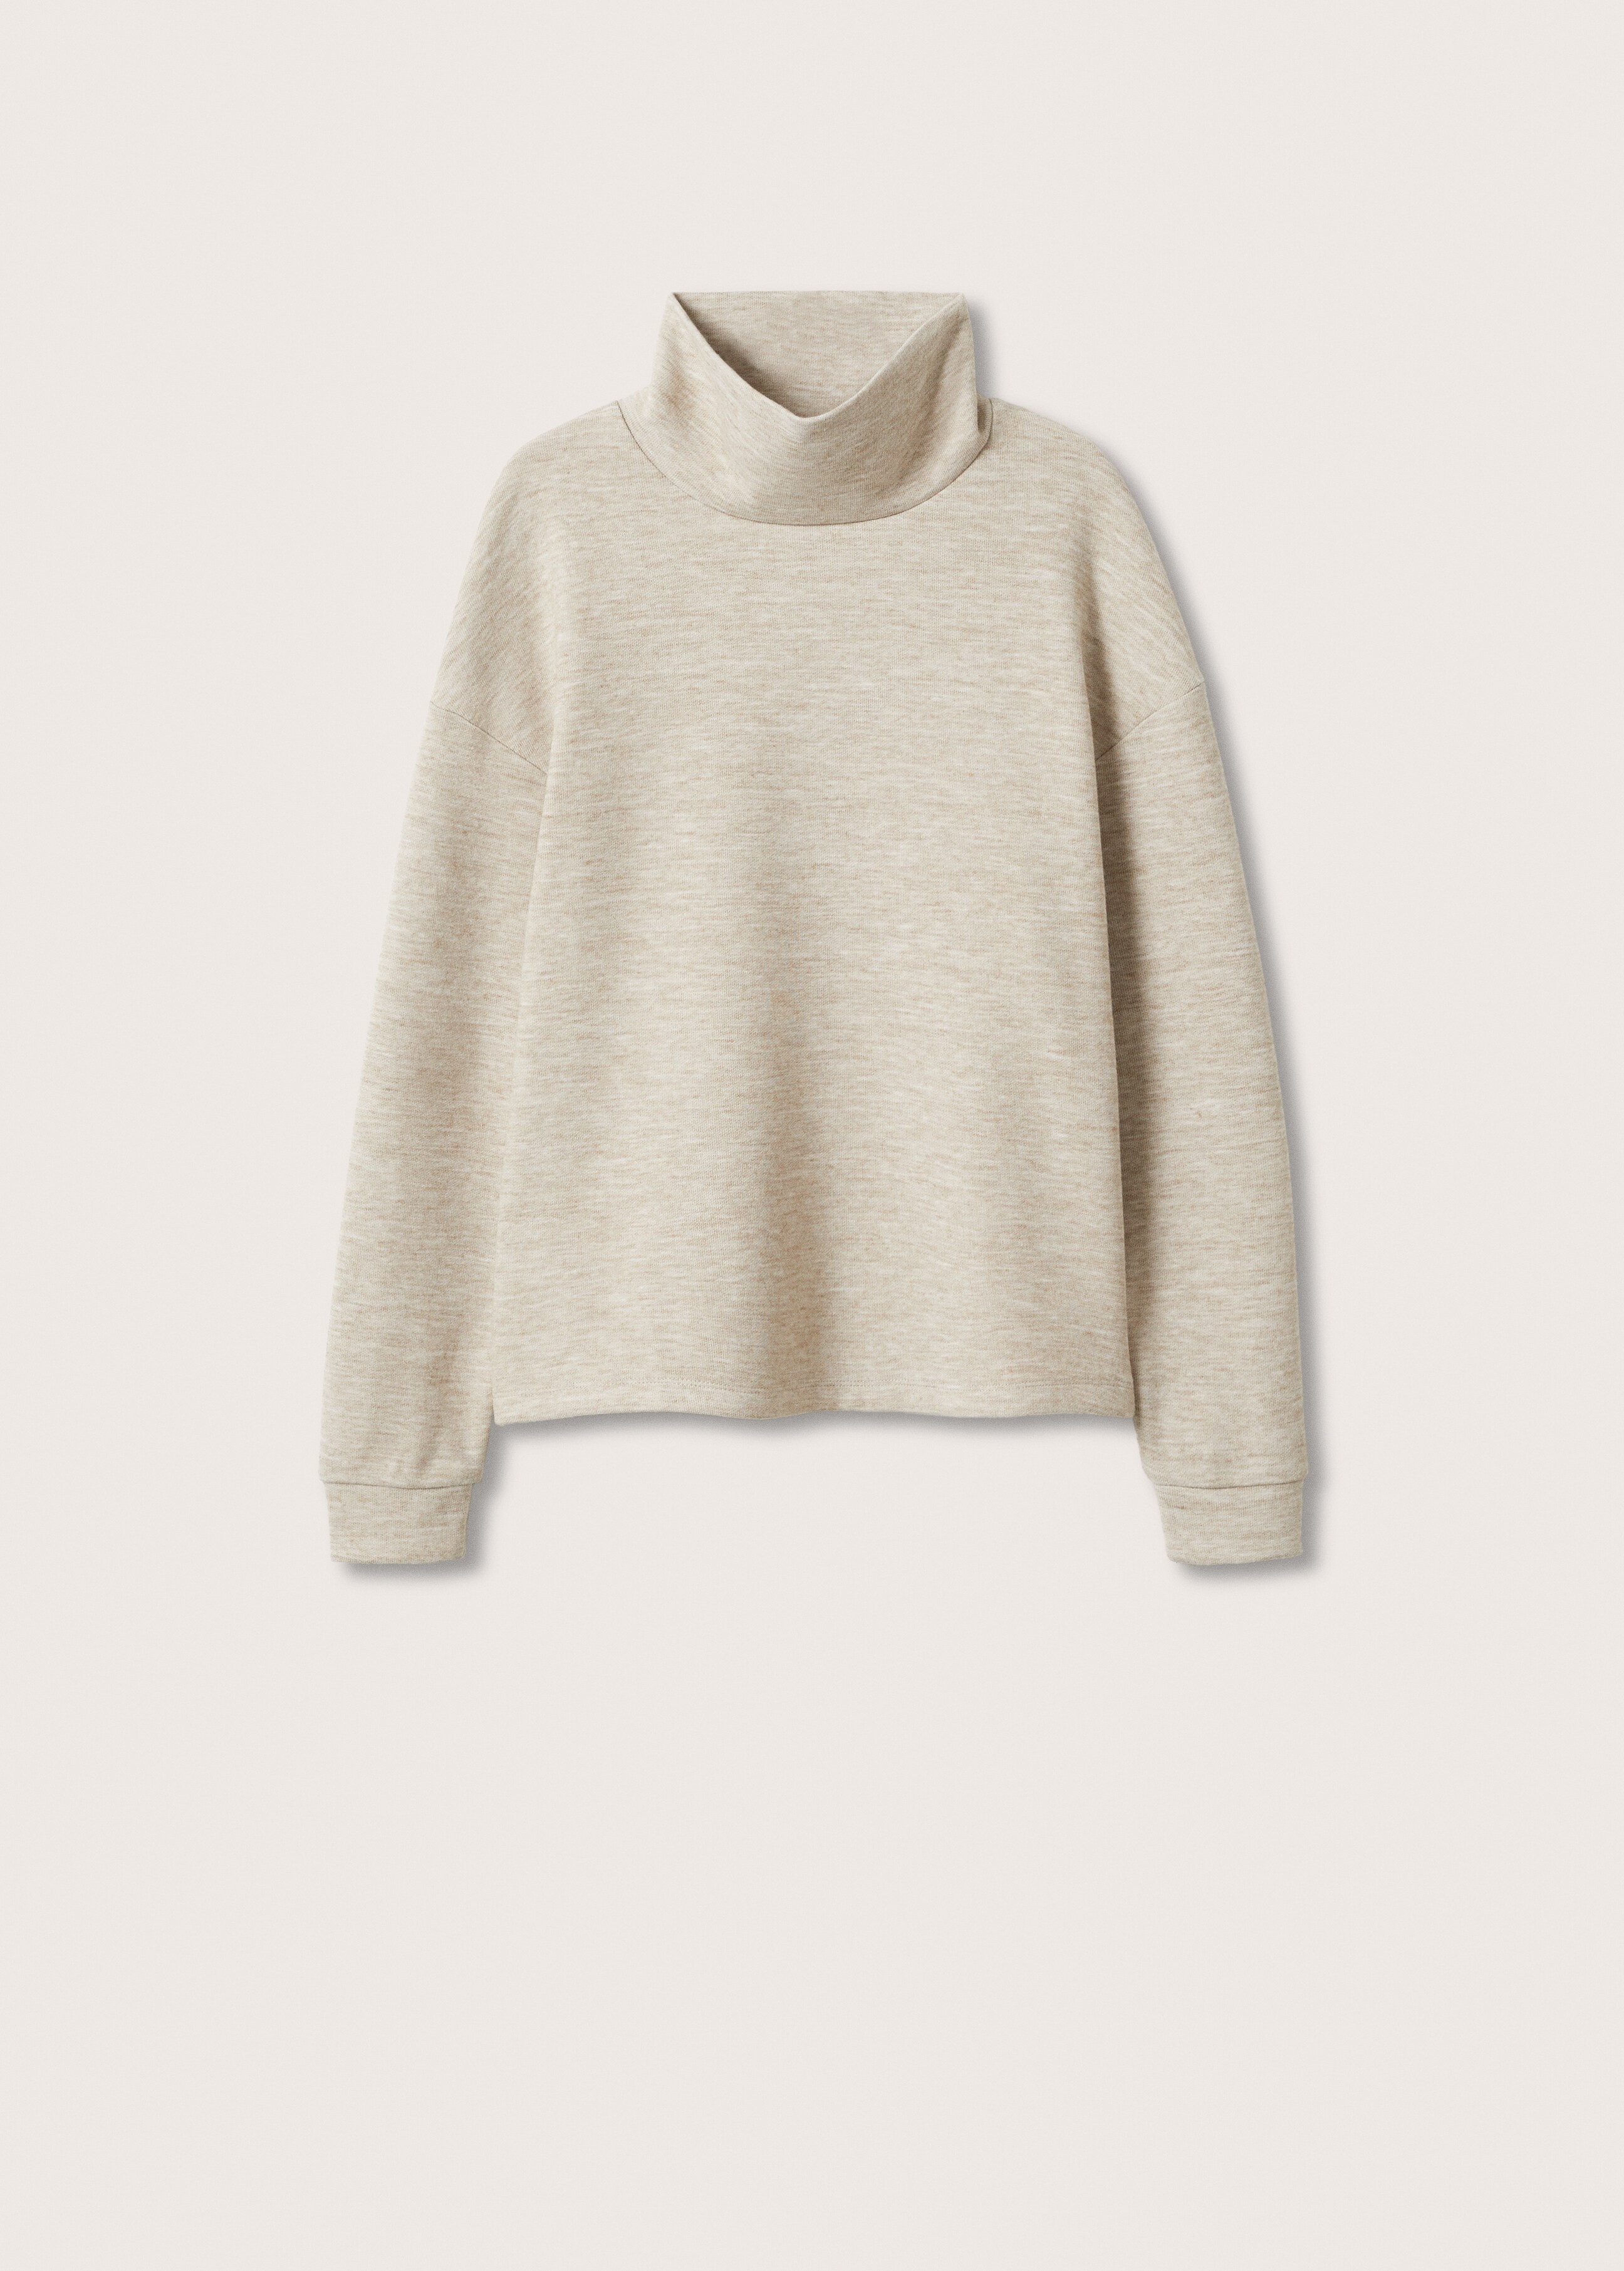 Funnel neck sweatshirt - Article without model